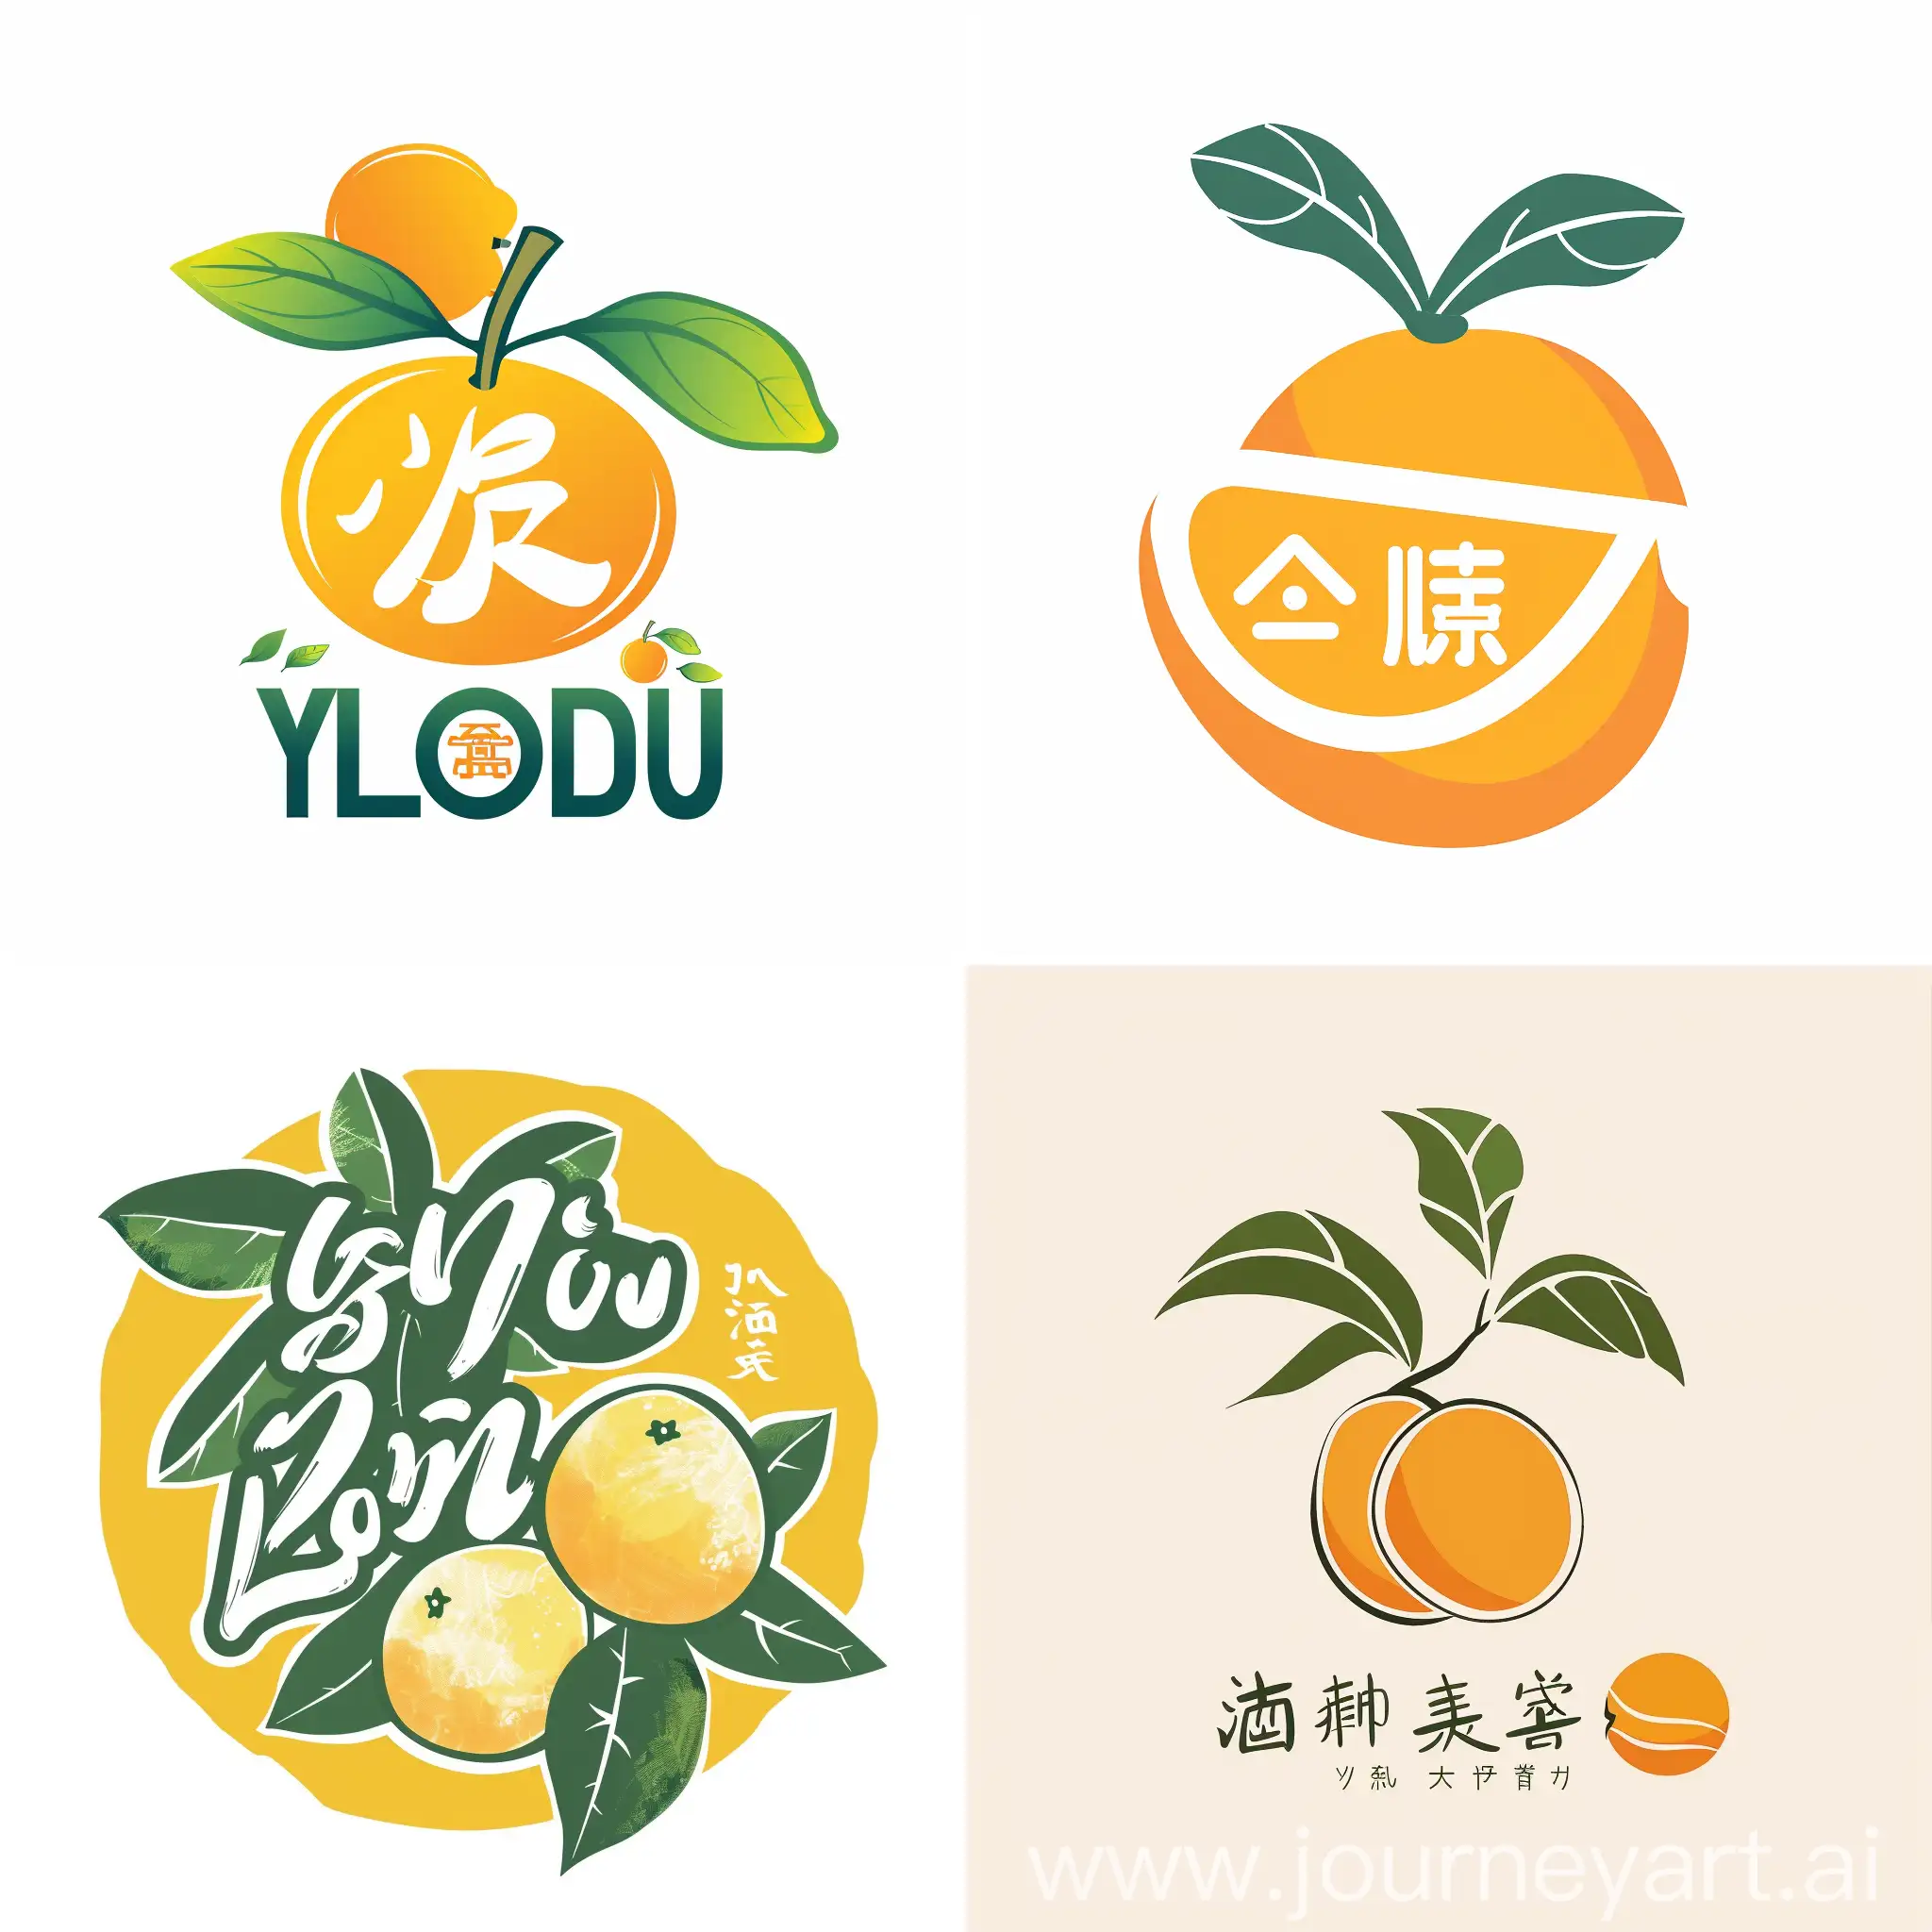 Vibrant-Yidu-Loquat-Logo-Embodying-Youthful-Charm-and-Town-Simplicity